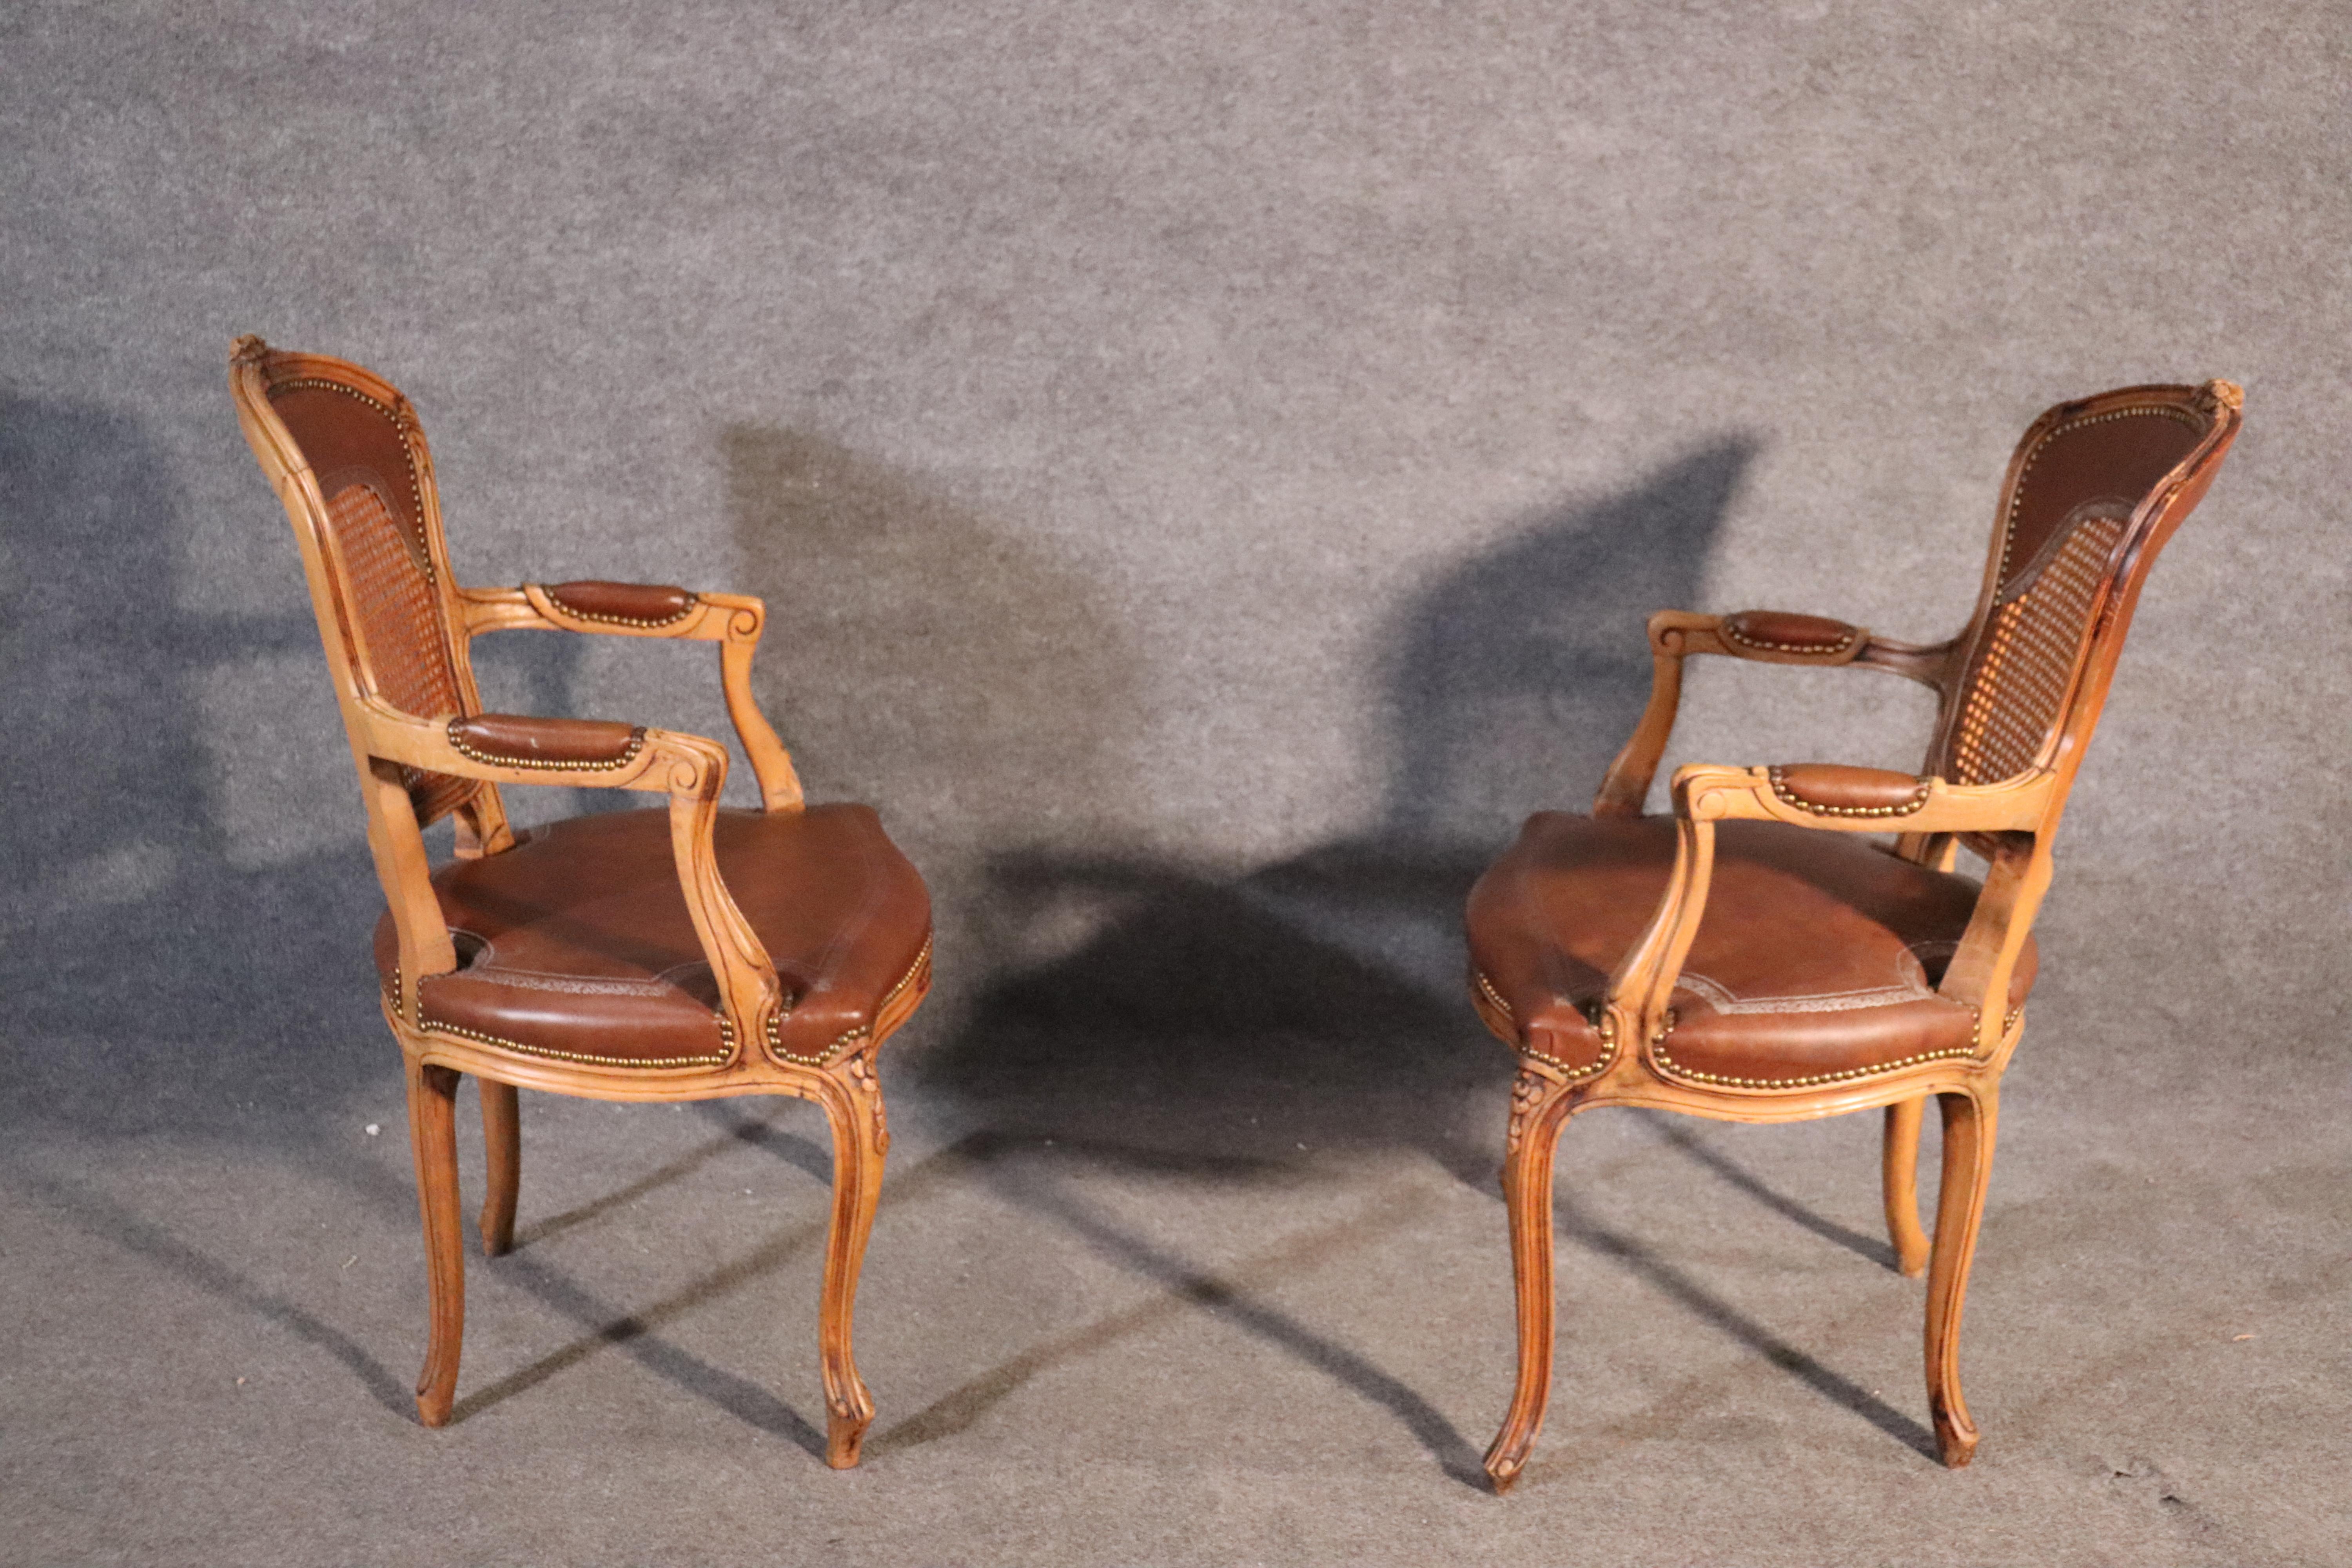 These gorgeous chairs feature beautiful caned backs and finely carved frames surmounted with carved flowers. The upholstery is simulated embossed material made to look like leather but it's not. The chairs are French and date to the 1940s era. They